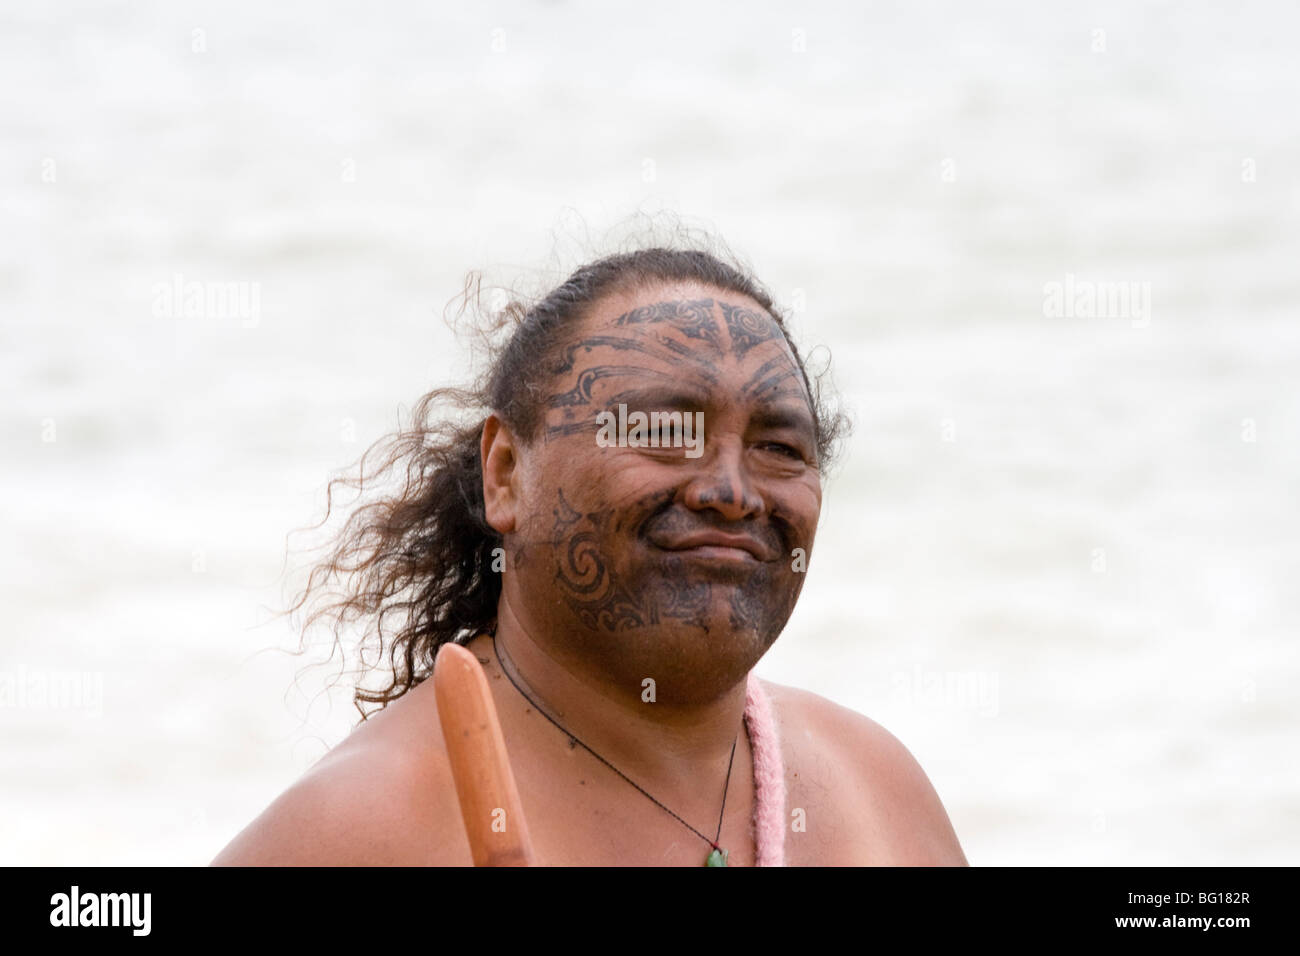 Maori male with painted tribal tattoos on face Stock Photo